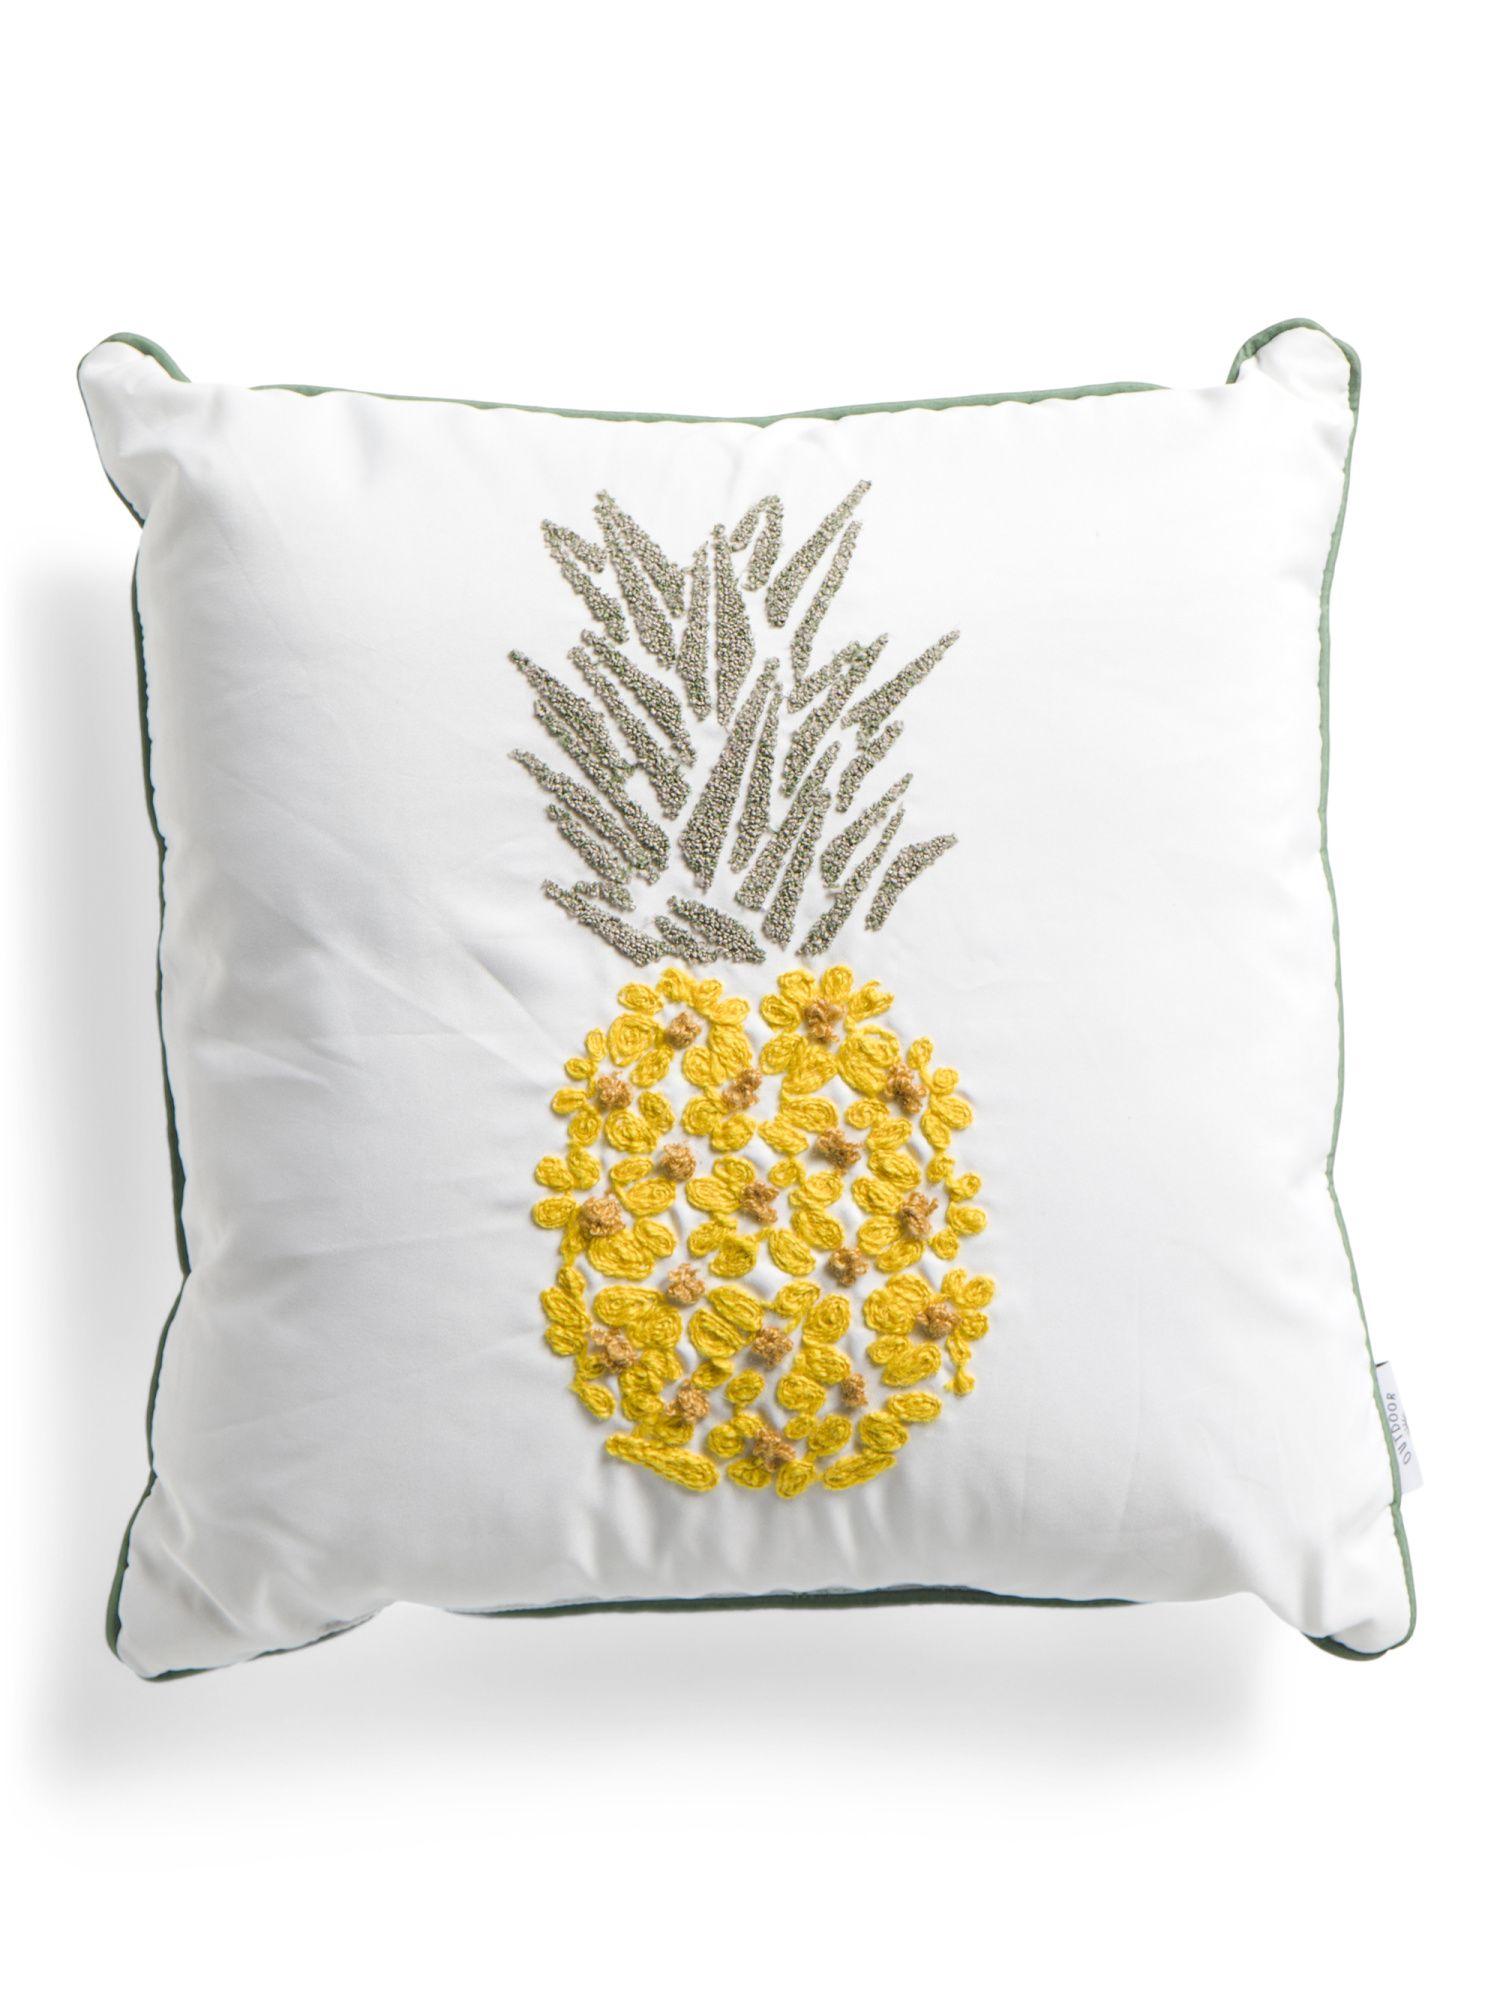 18x18 Indoor Outdoor French Knot Pineapple Pillow | TJ Maxx